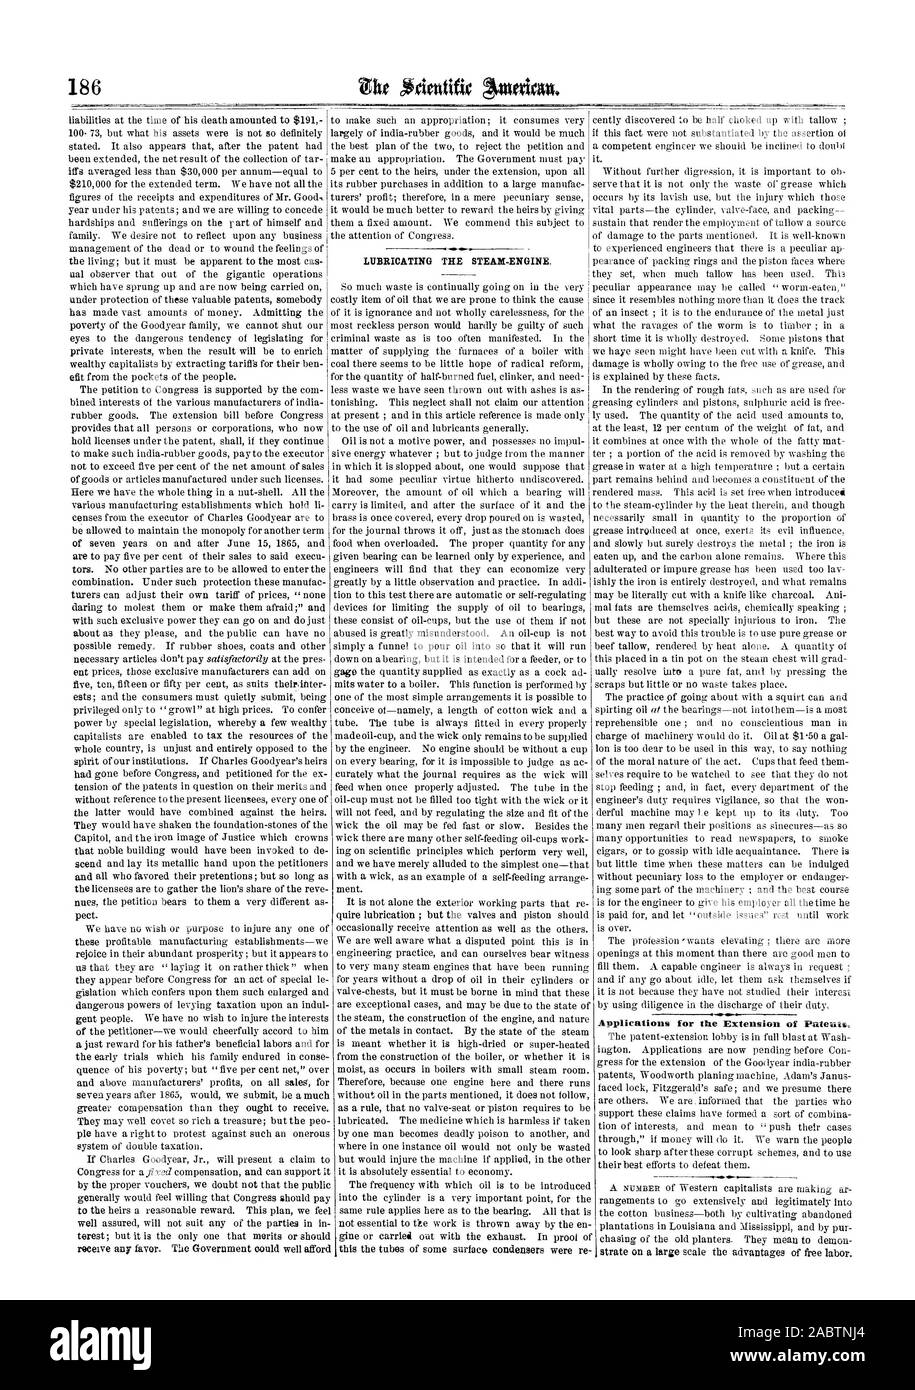 Applications for the Extension of Patents LUBRICATING THE STEAM-ENGINE., scientific american, 1864-03-19 Stock Photo